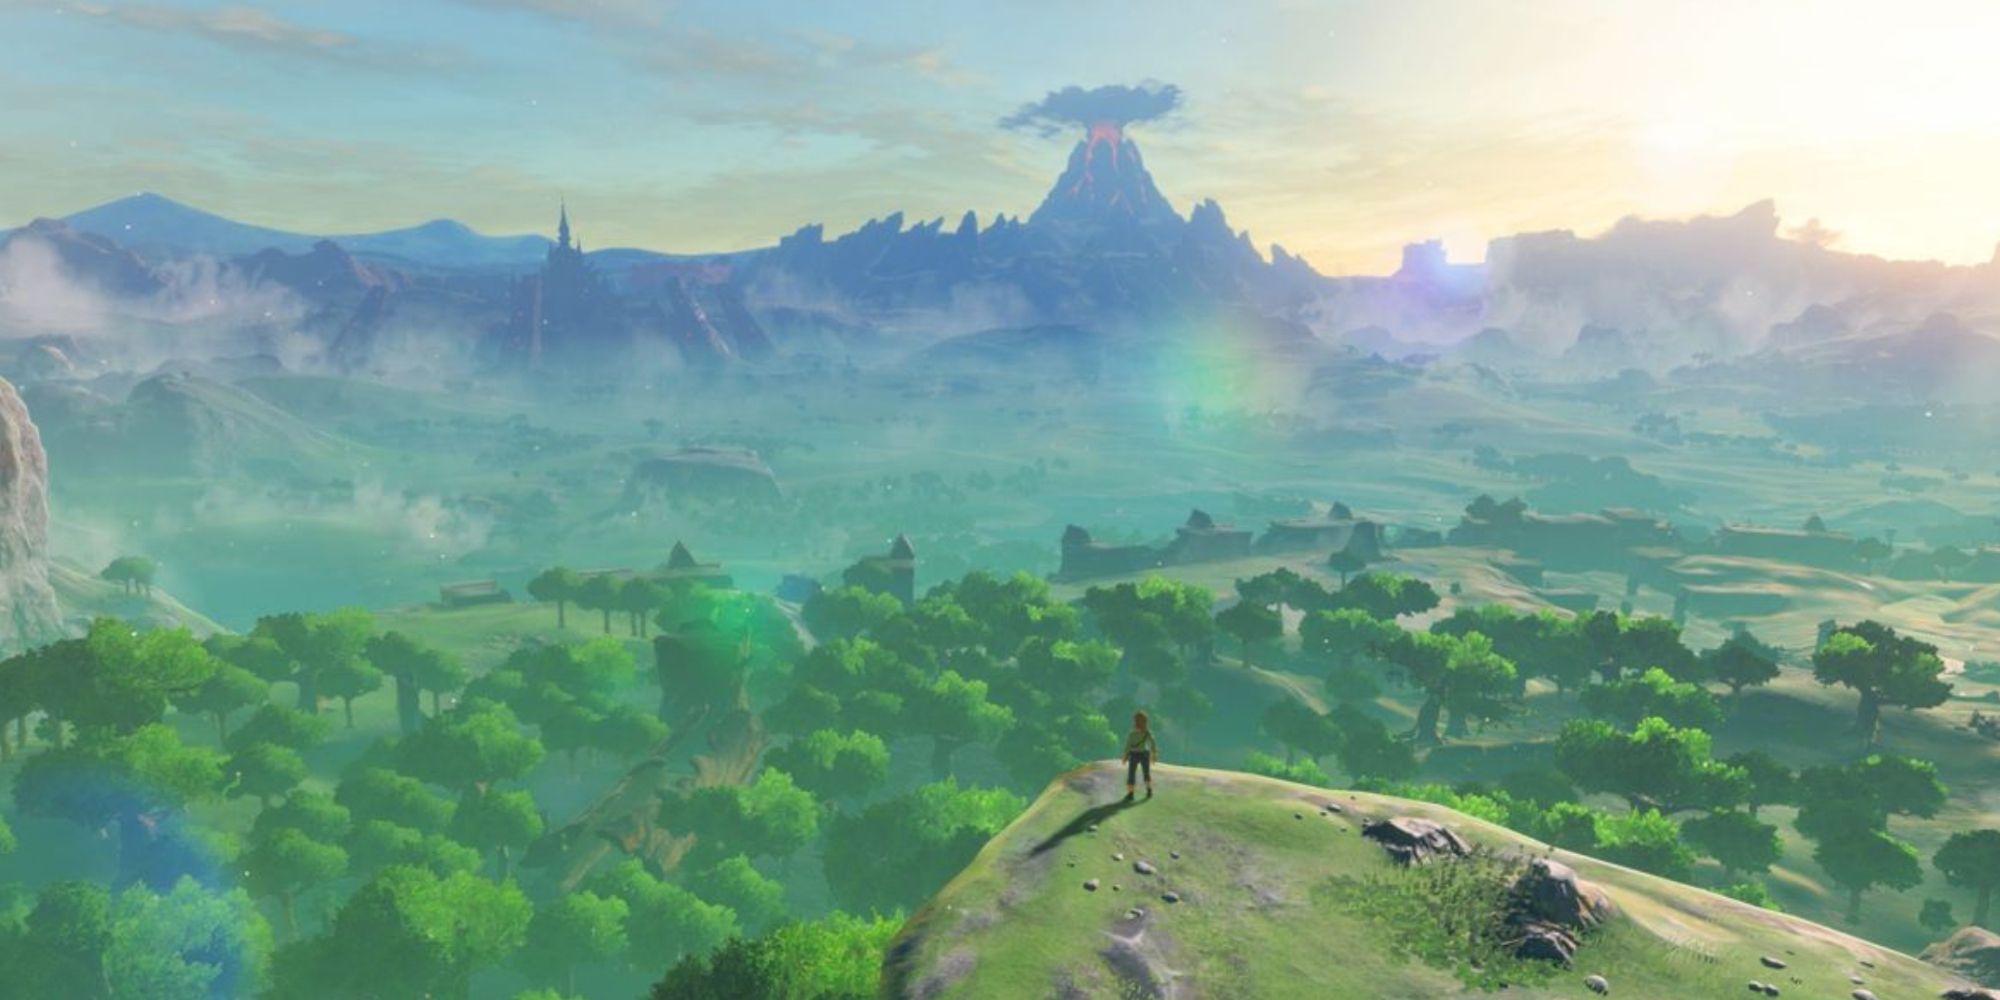 Link staring out at Hyrule from the edge of the Great Plateau in The Legend of Zelda: Breath of the Wild